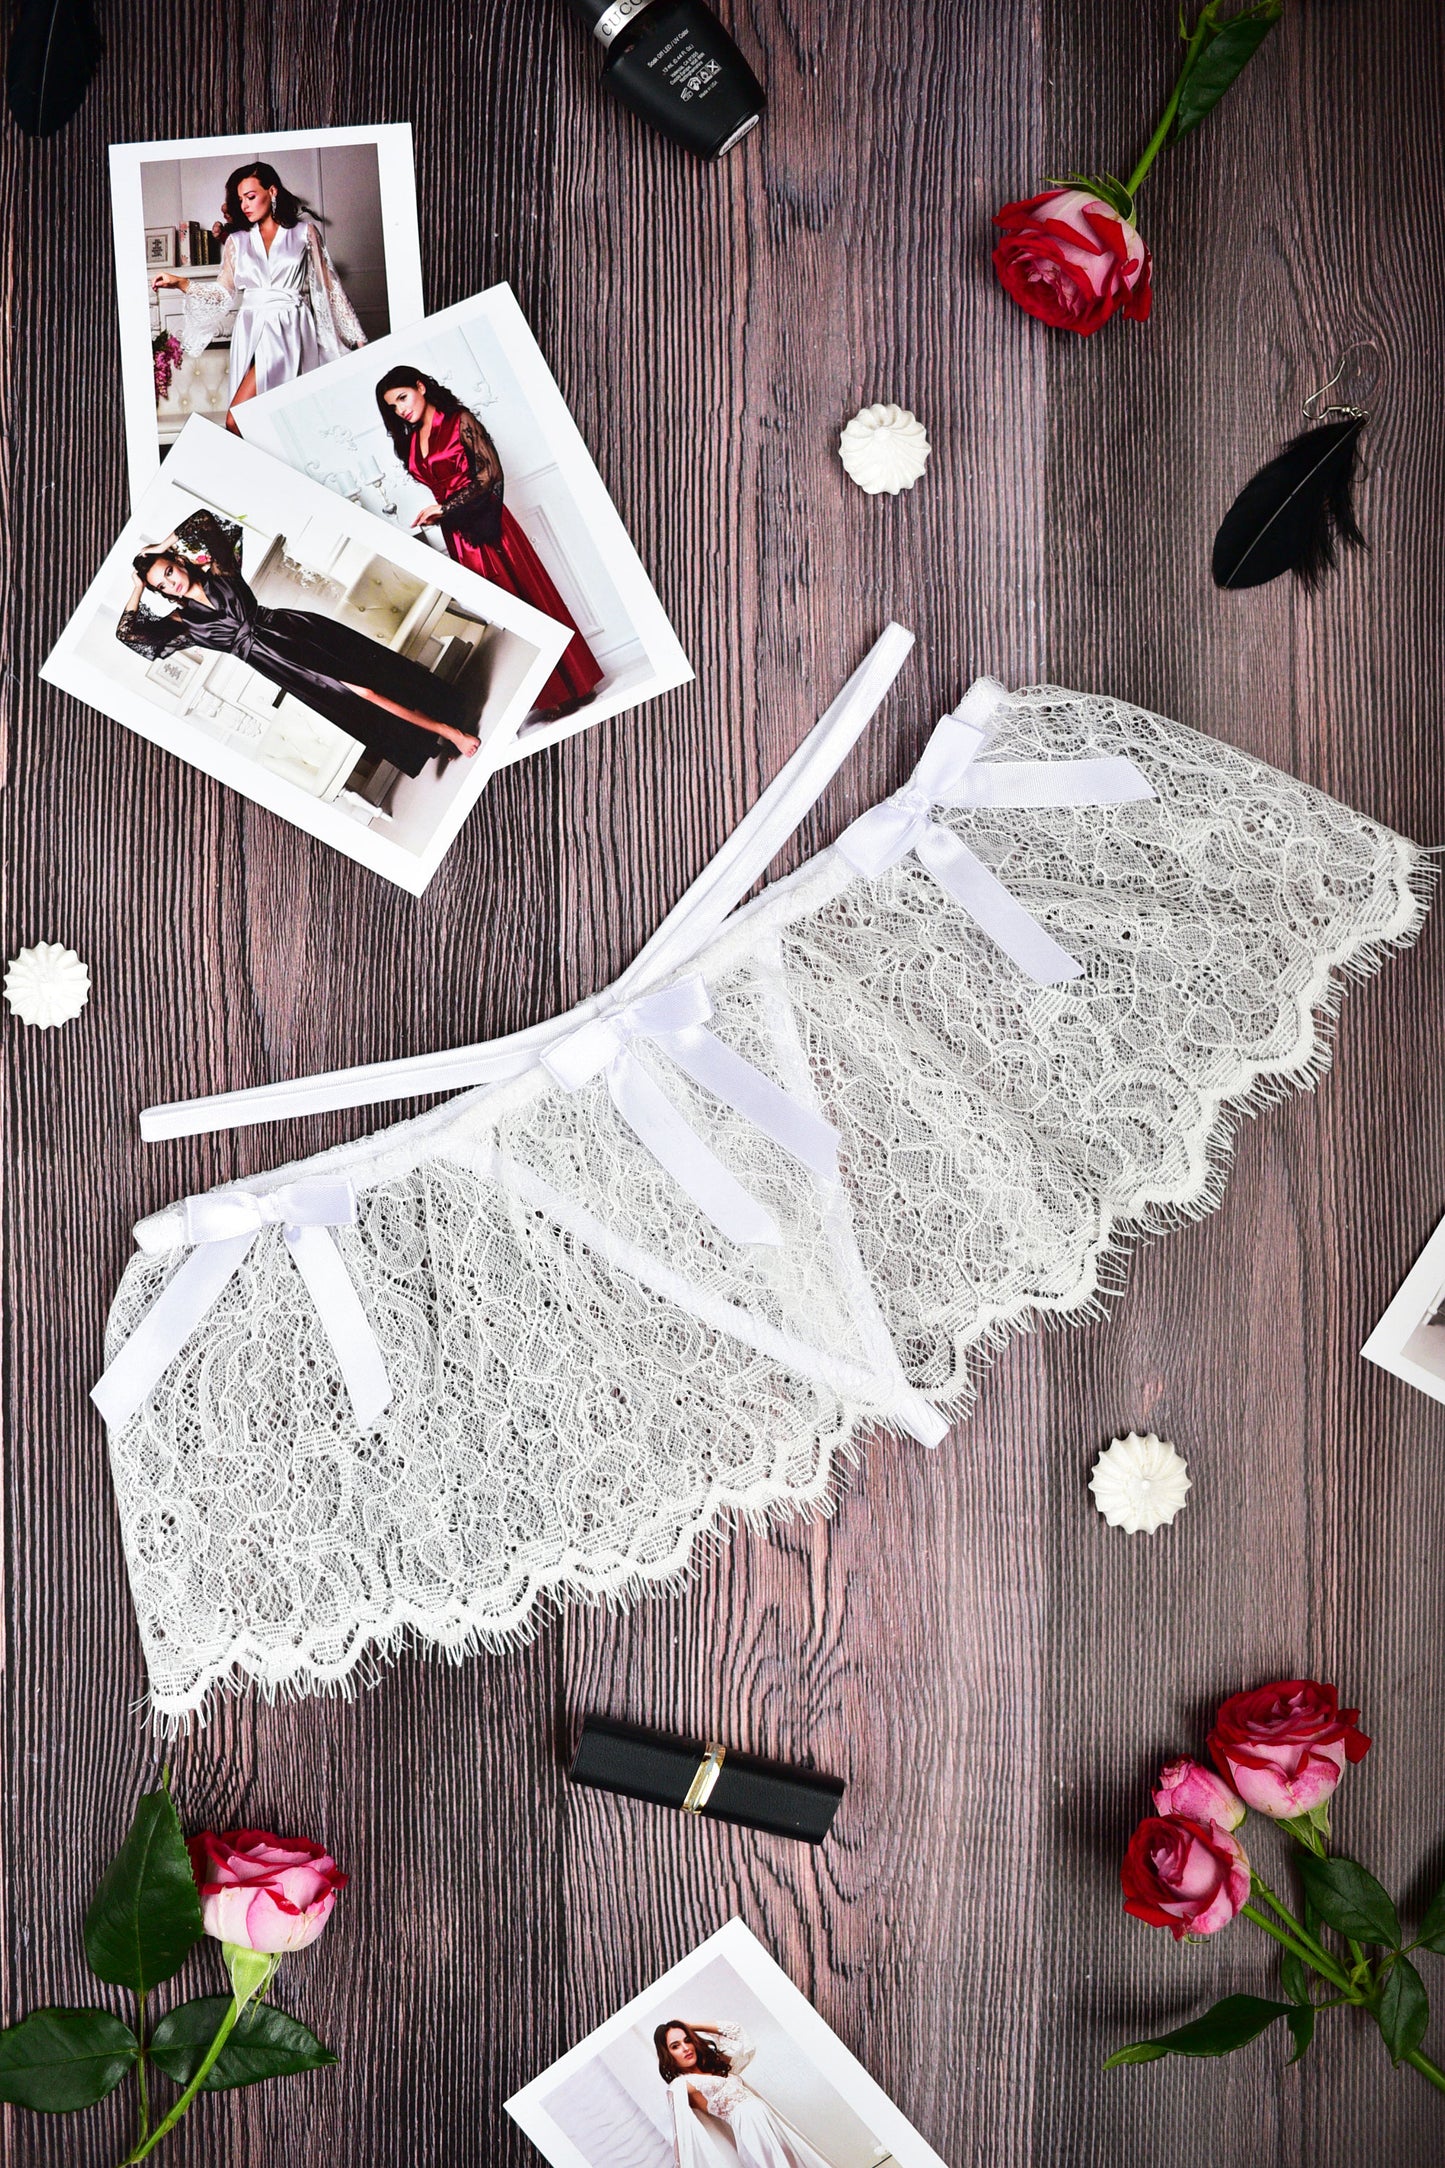 Bridal Lingerie Set in White - Lace Bra with Crotchless Panty 